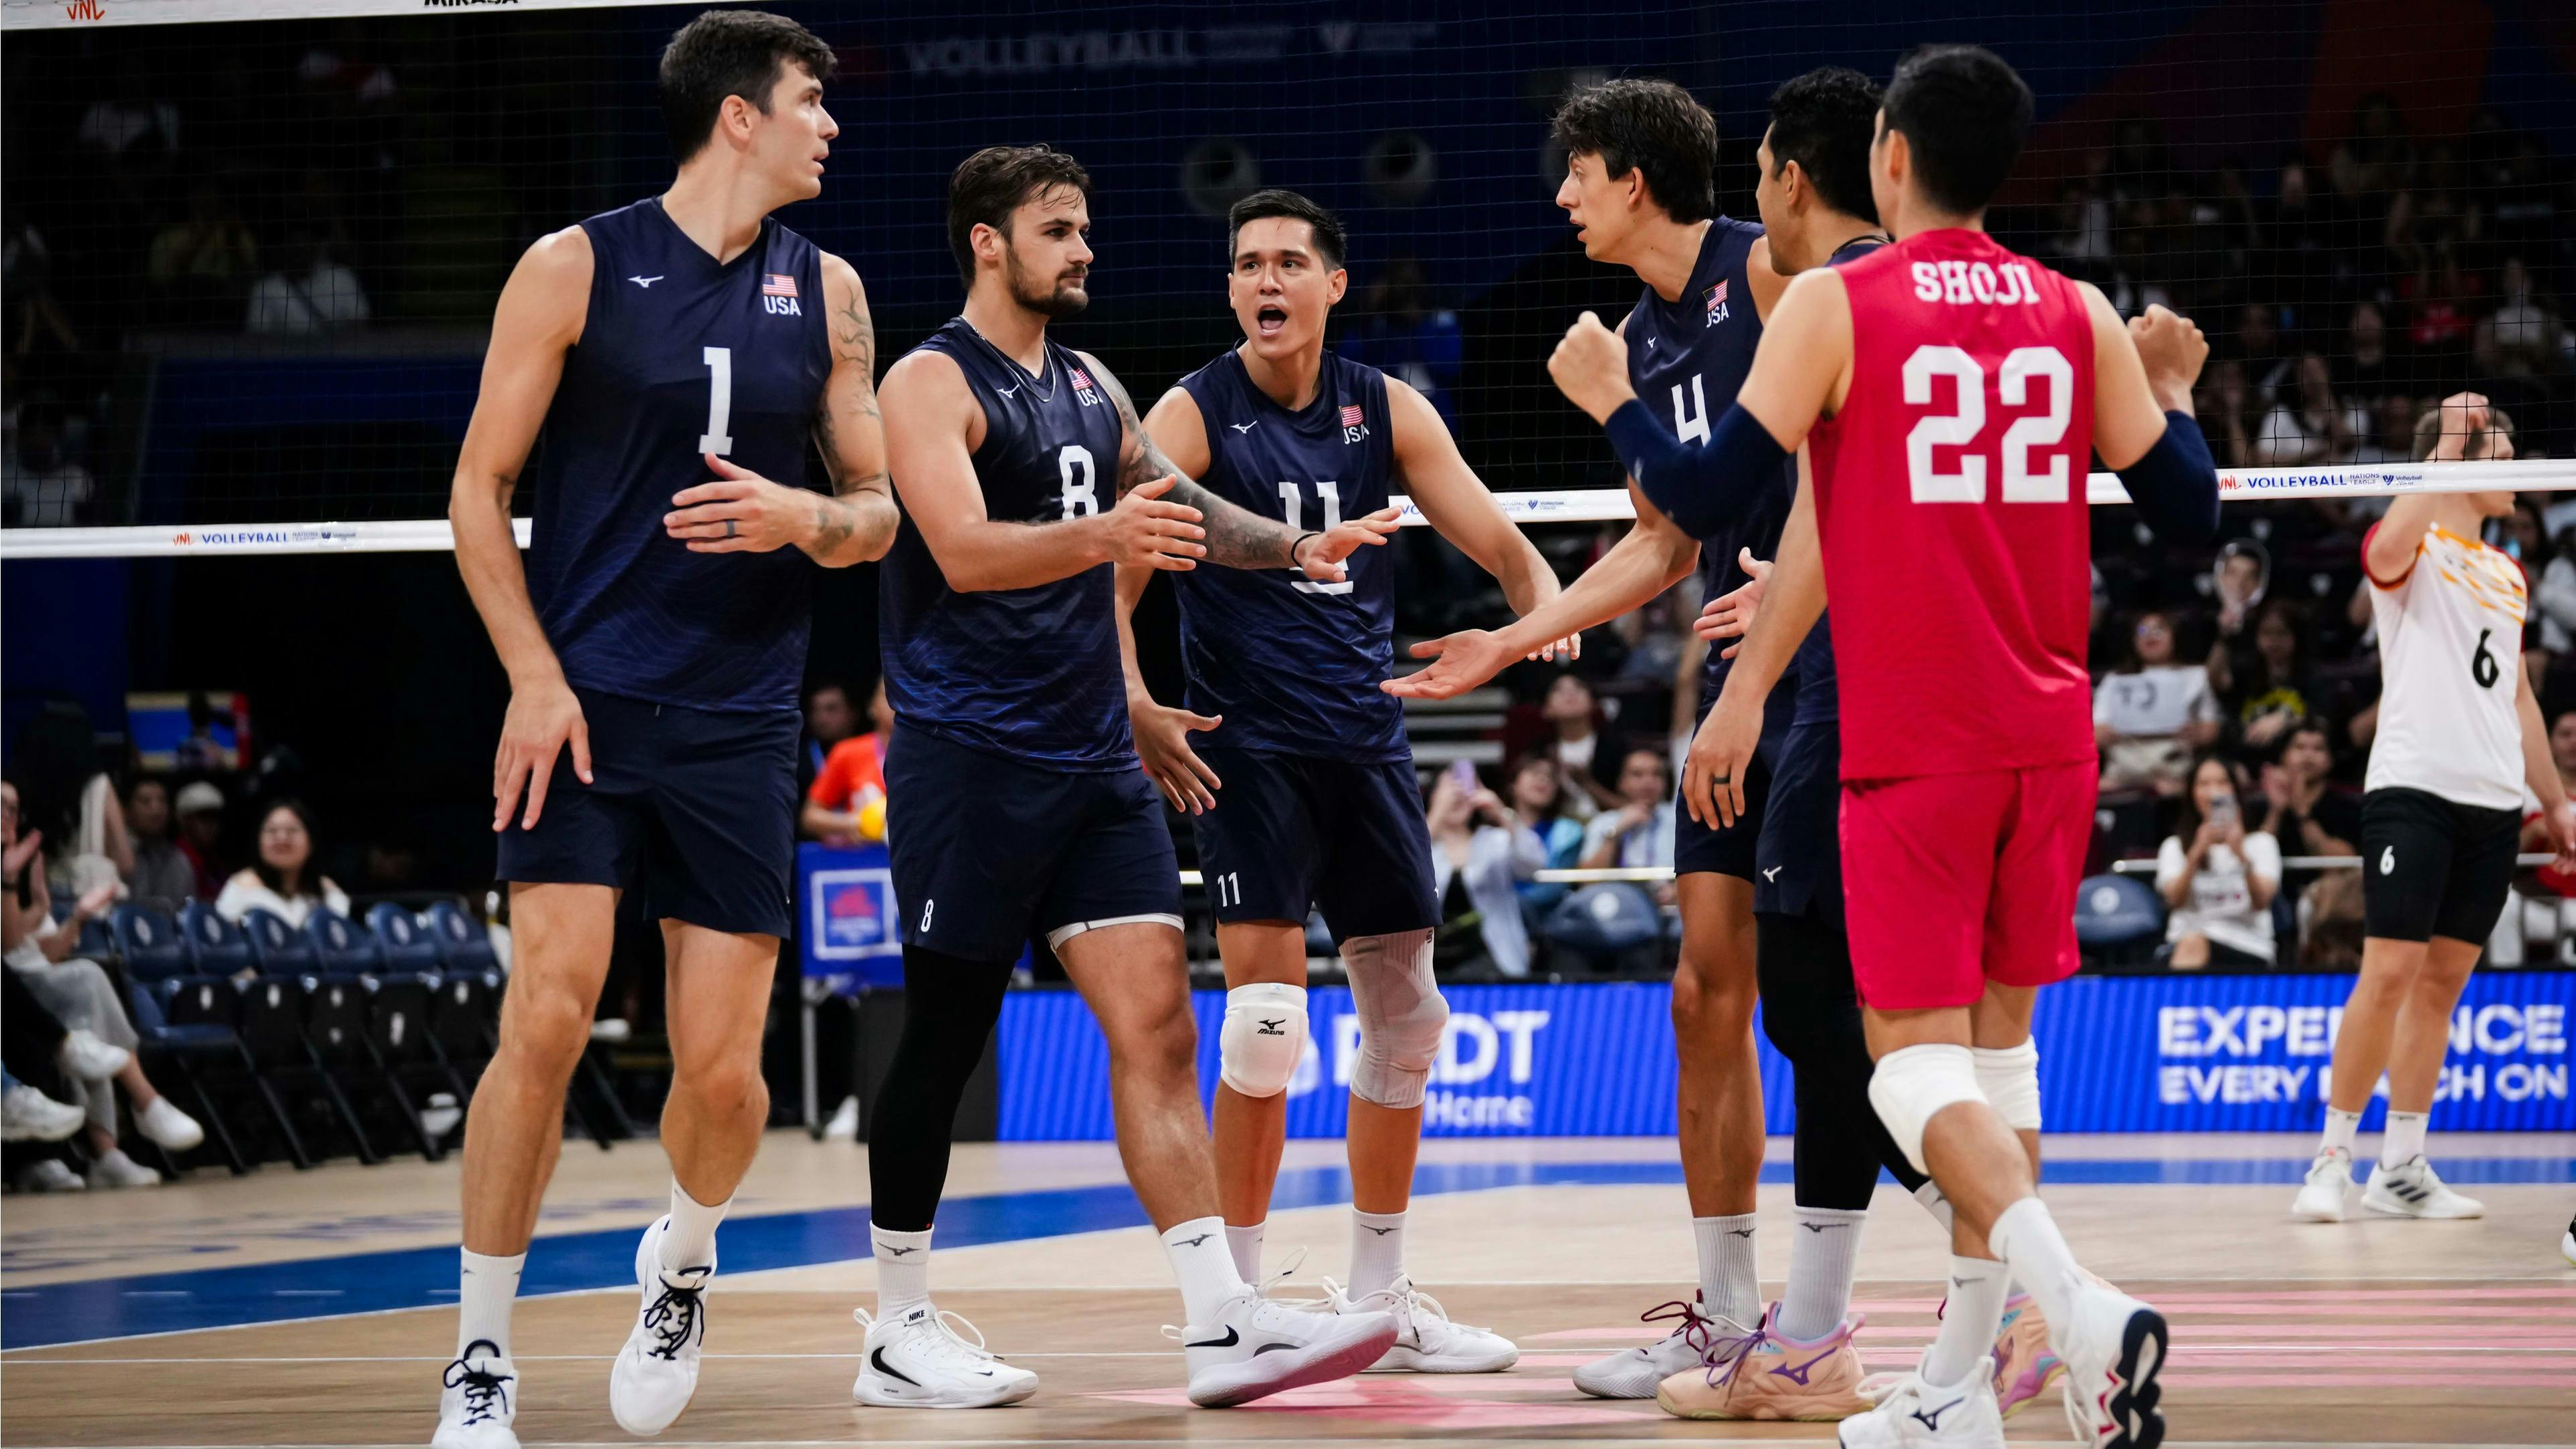 VNL: Matt Anderson, USA keep Final Eight hopes alive with crucial win over Germany